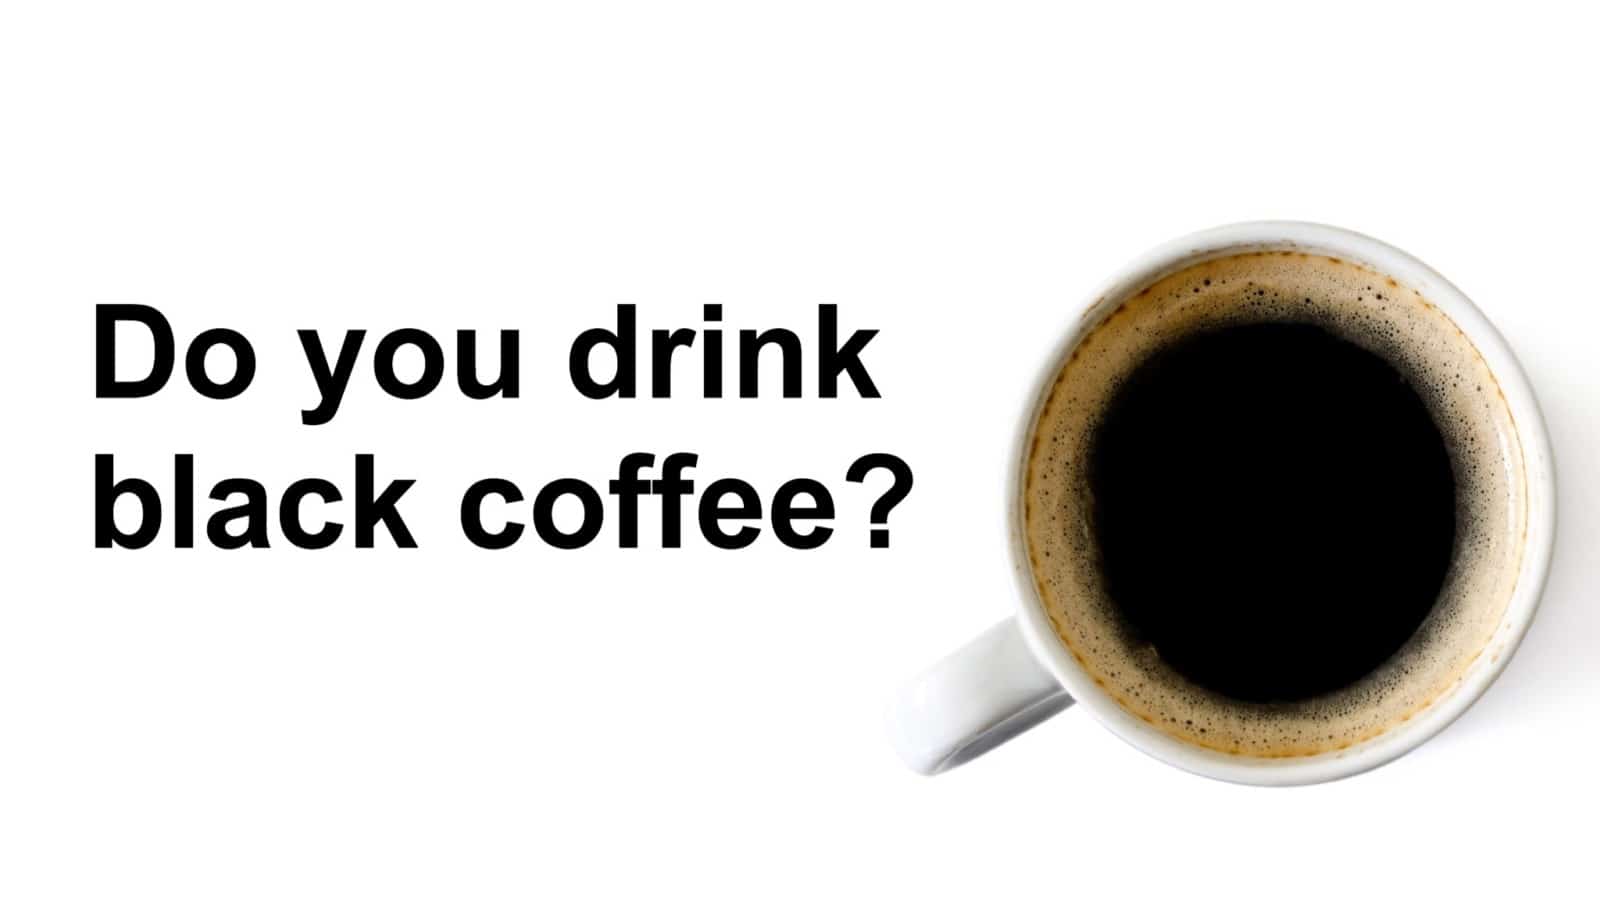 Researchers Reveal What Drinking Black Coffee Says About Your Personality